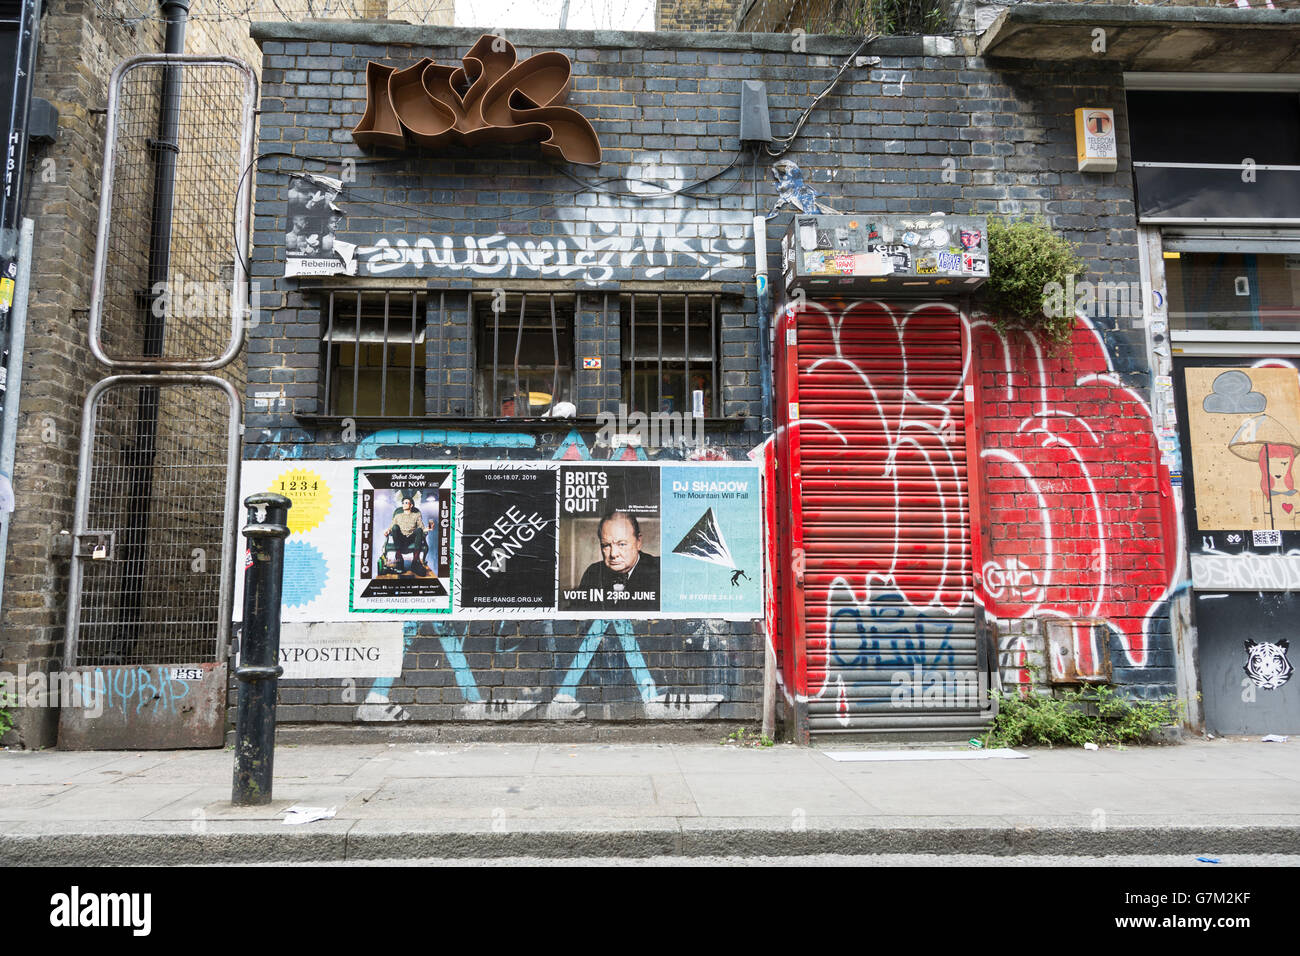 Brits Don't Quit election poster and graffiti in Spitalfields in London's East End Stock Photo